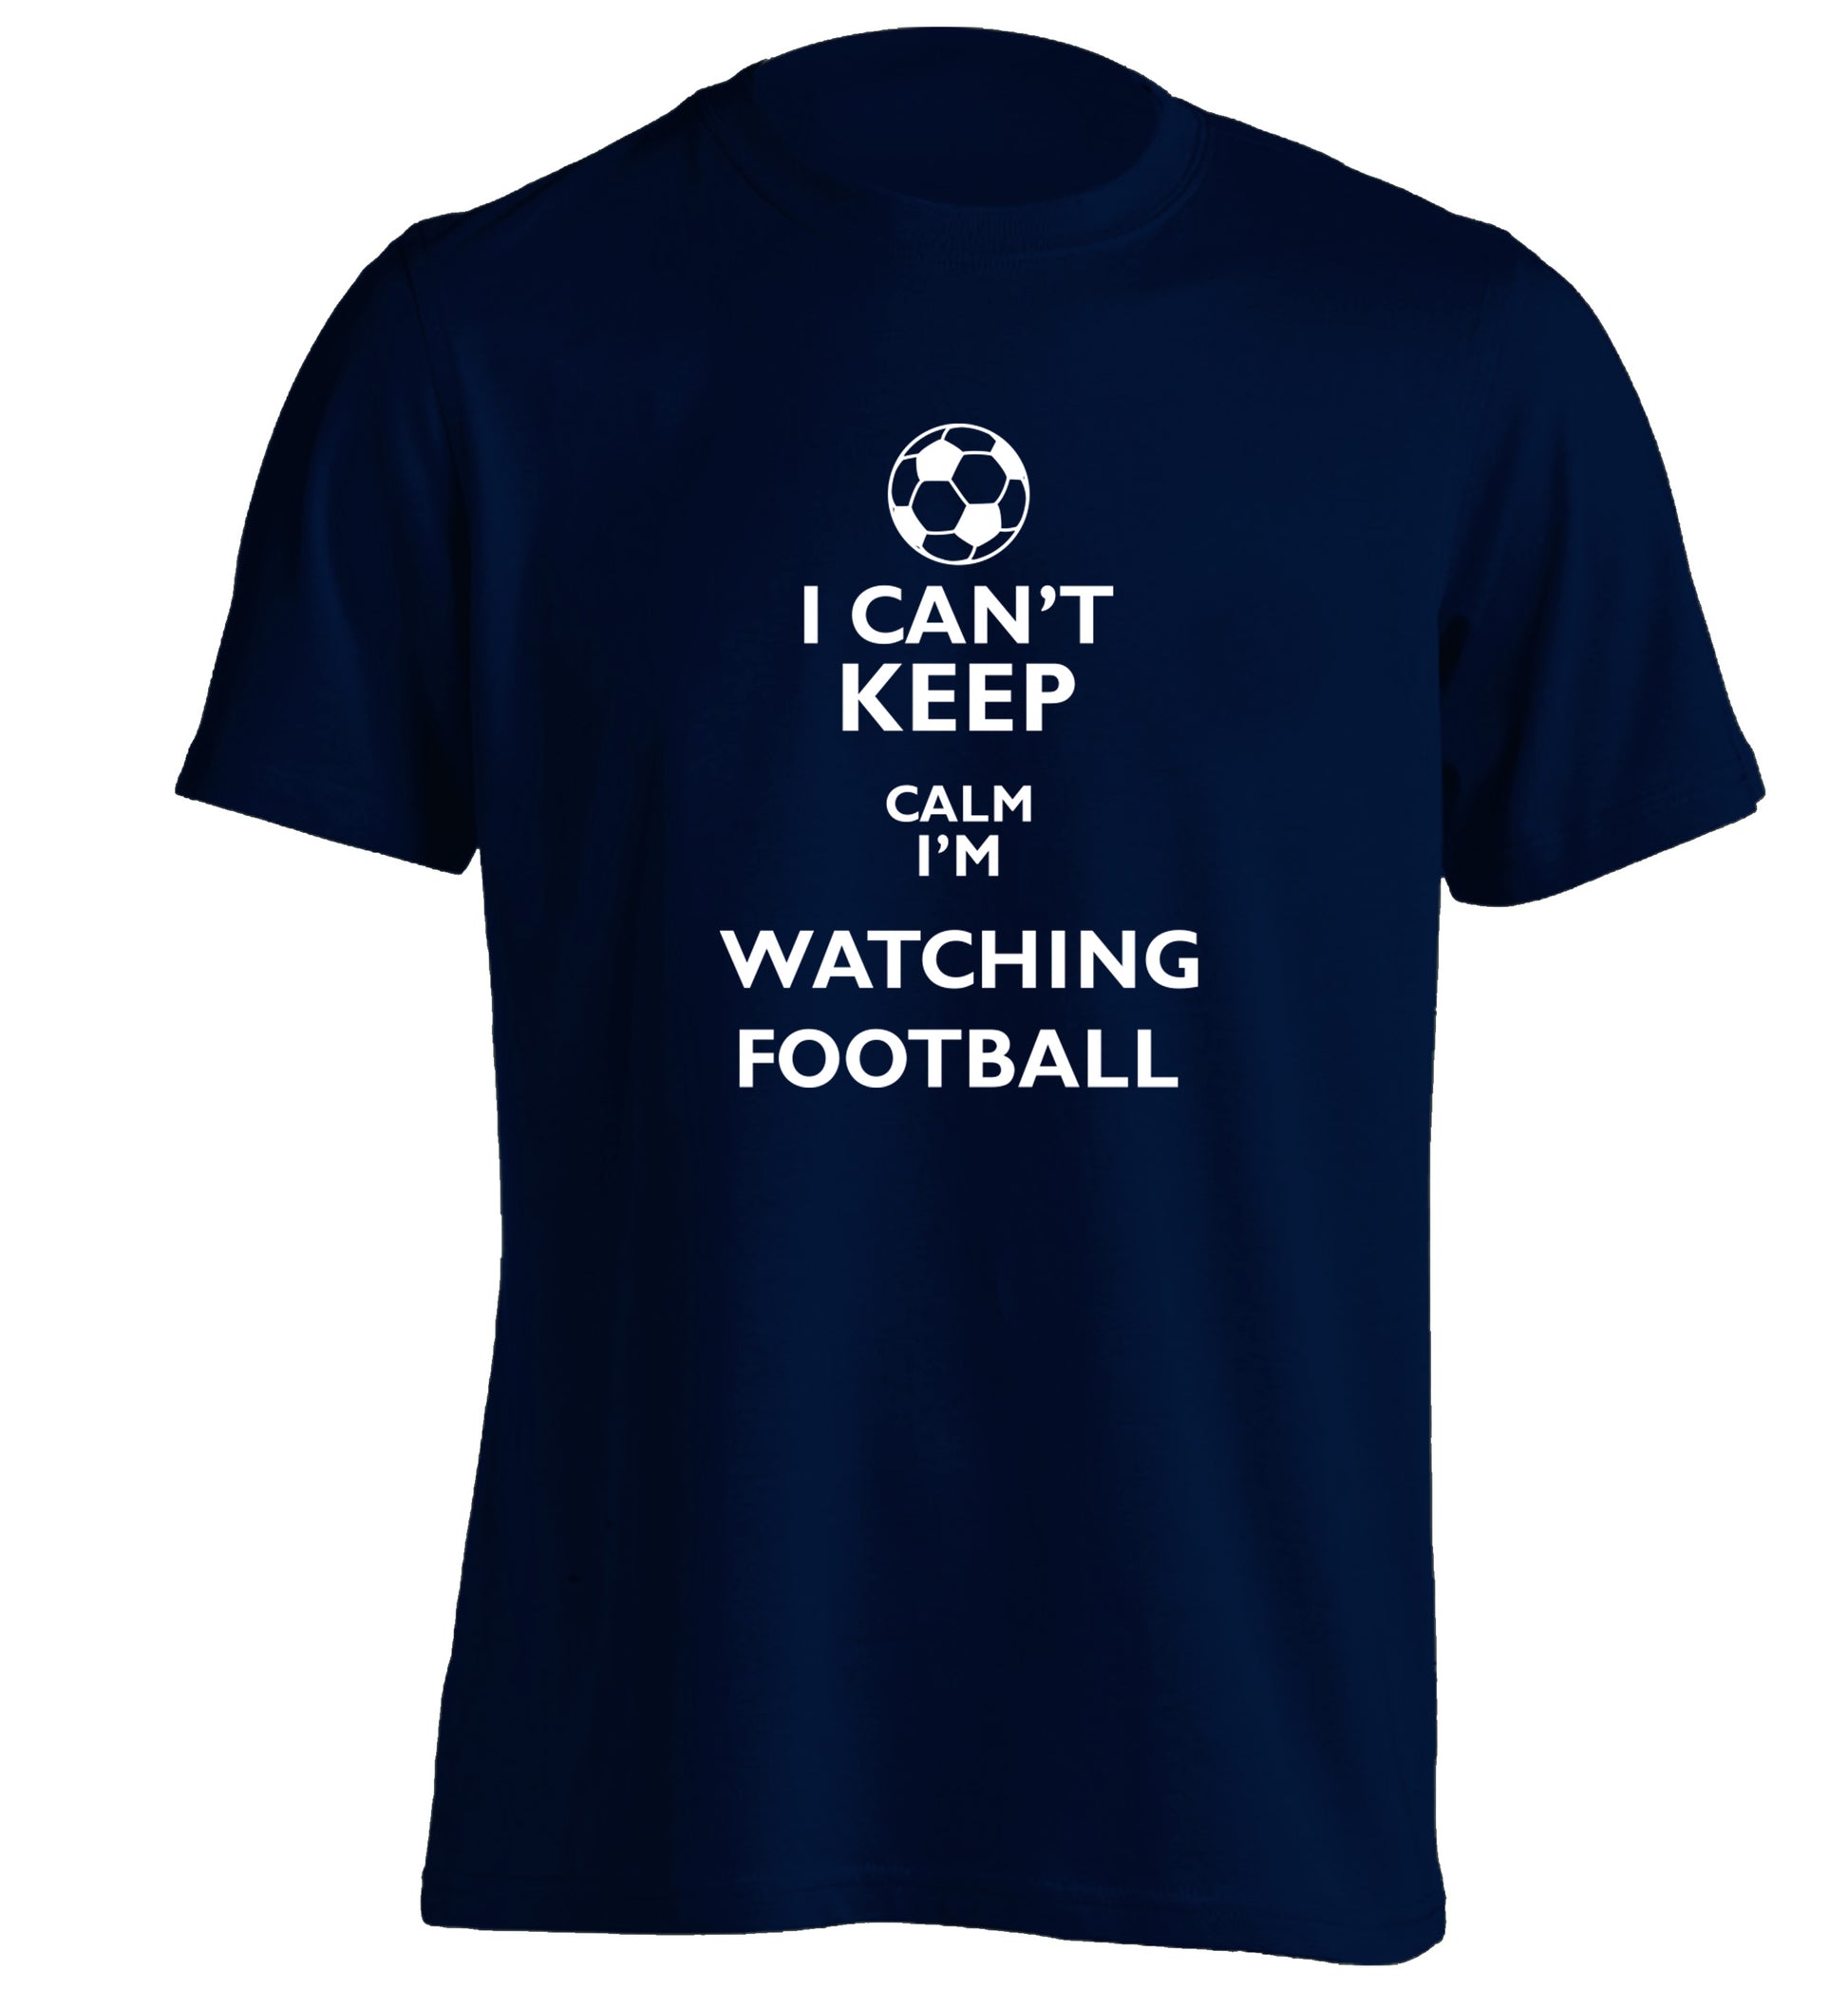 I can't keep calm I'm watching the football adults unisexnavy Tshirt 2XL